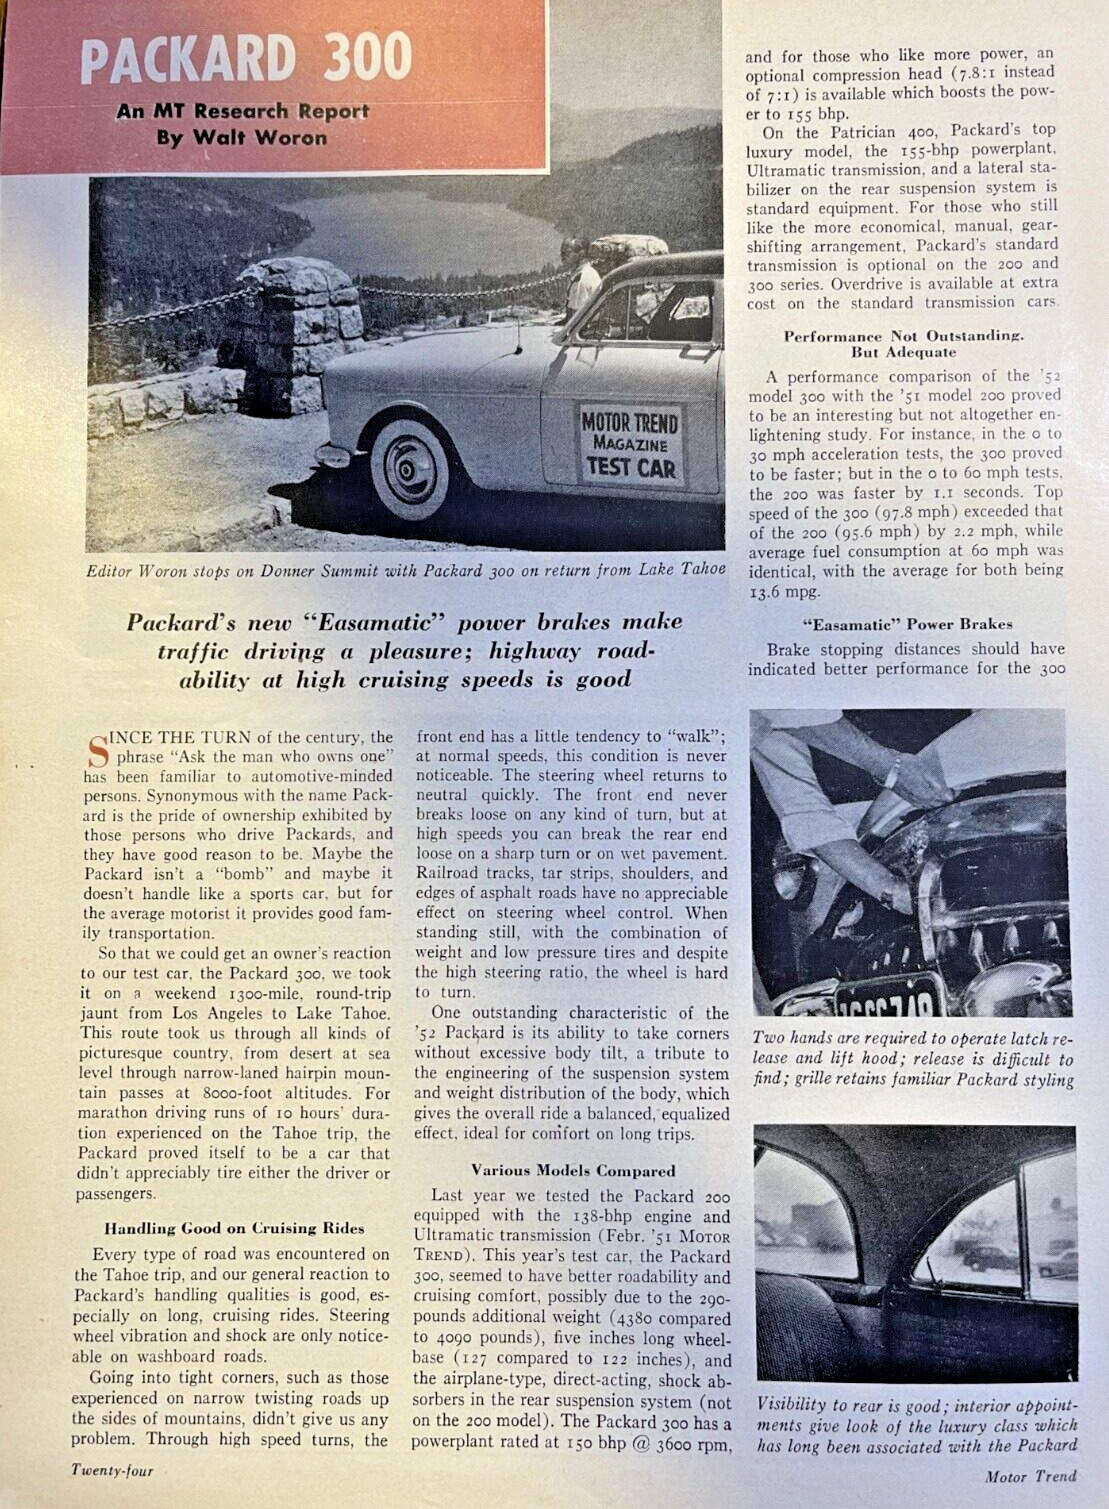 1952 Road Test Packard 300 illustrated